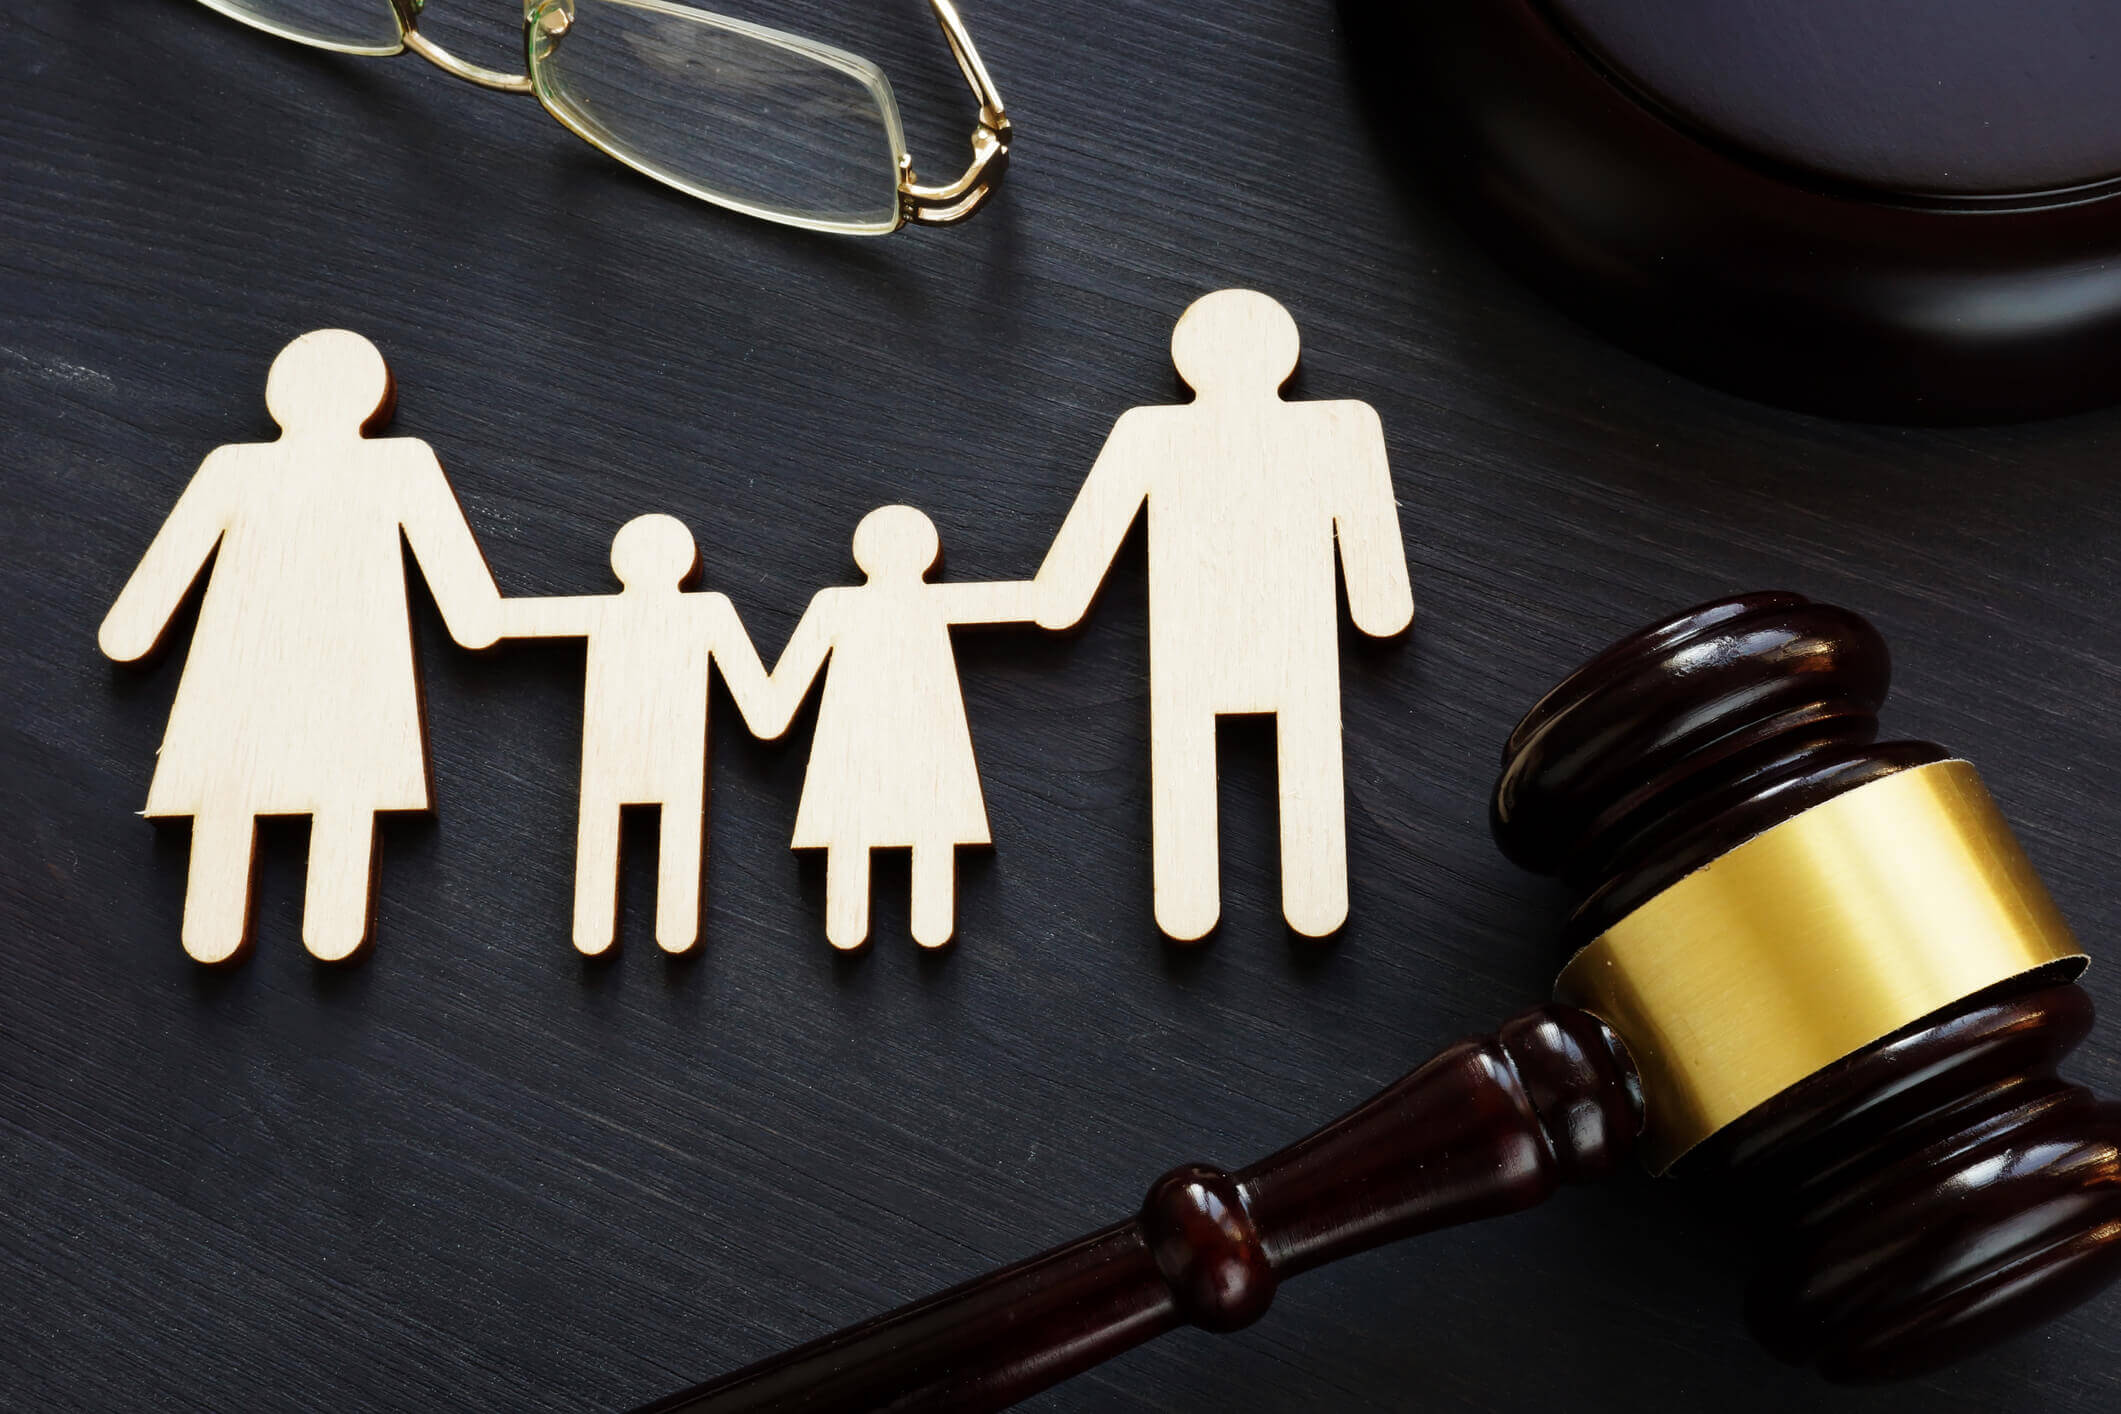 CDH Law discusses what you need to do to prepare for divorce in New York.